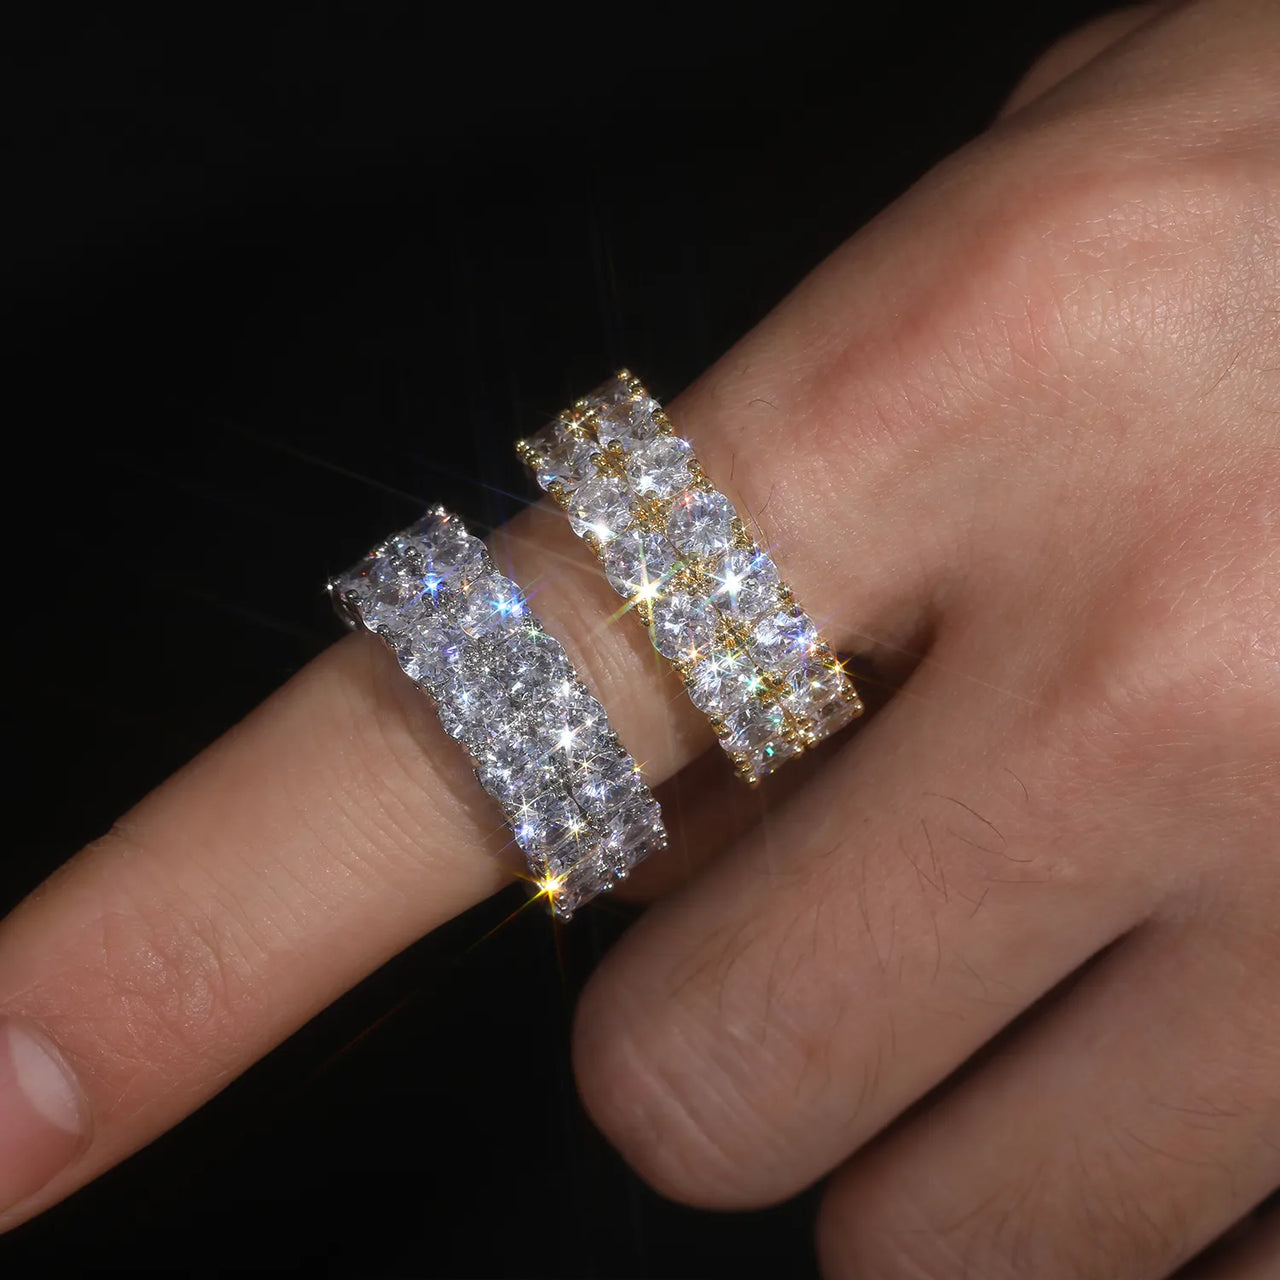 10mm S925 2 Row Moissanite Eternity Ring - Different Drips